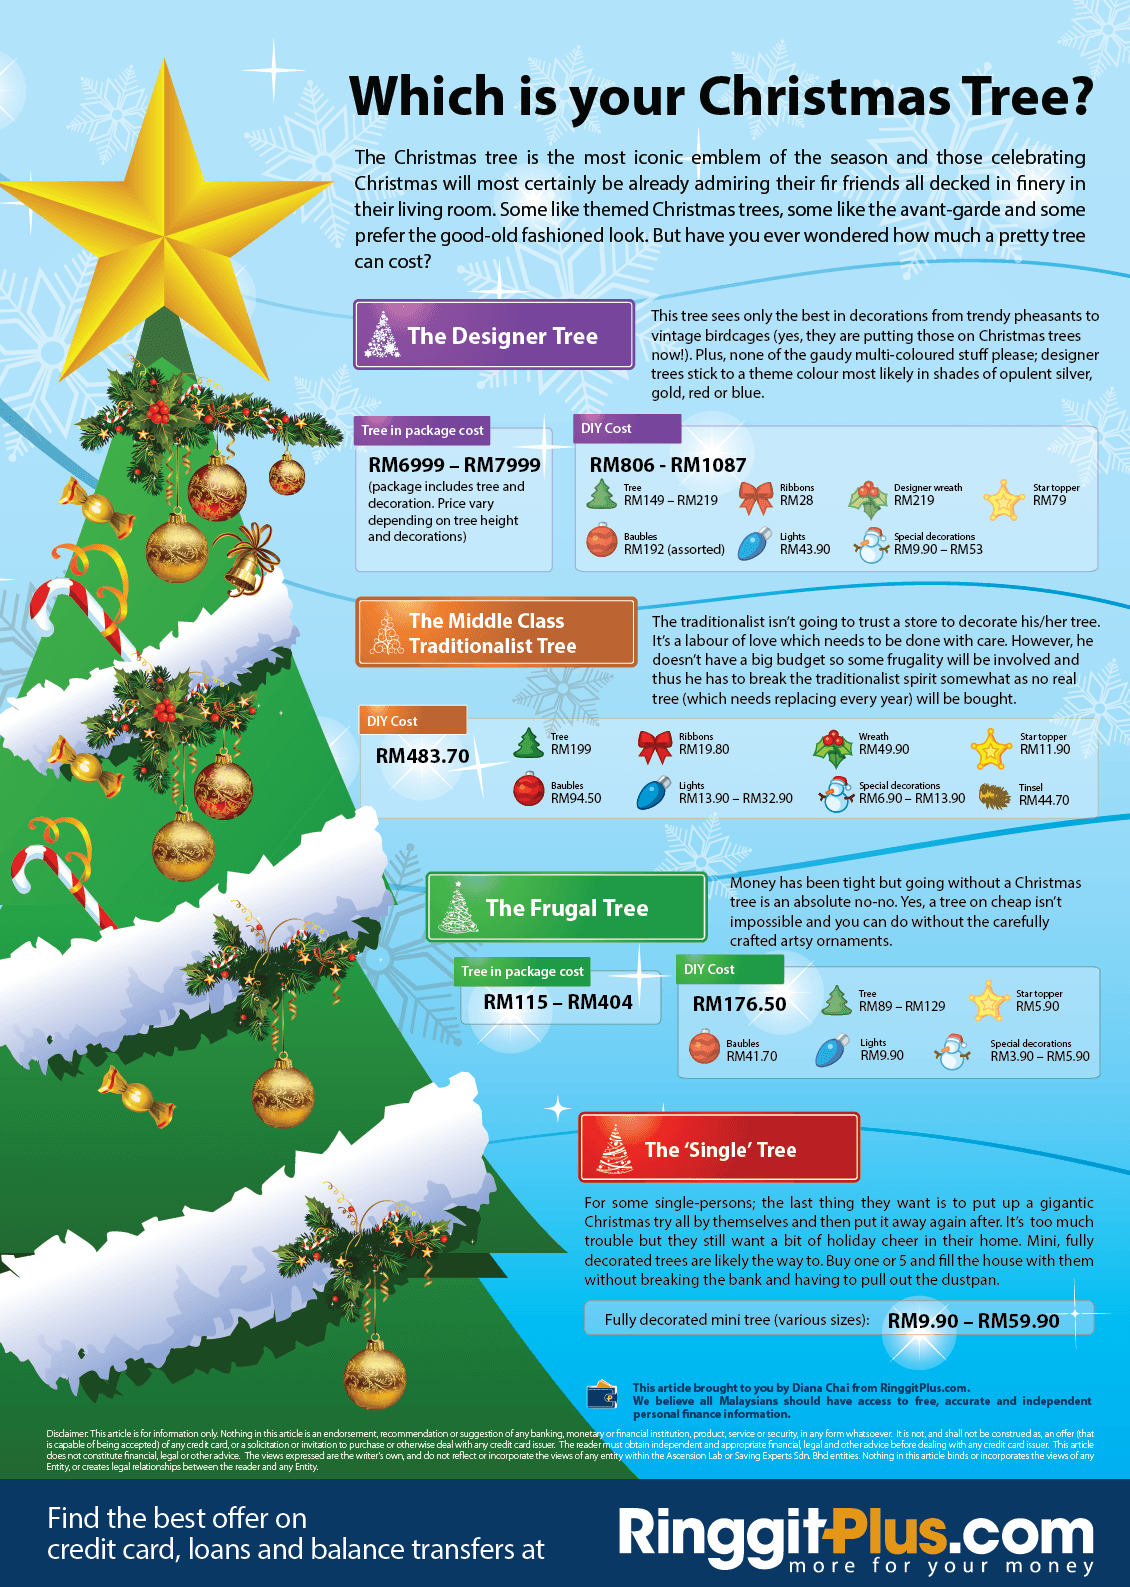 What kind of Christmas Tree can you afford?